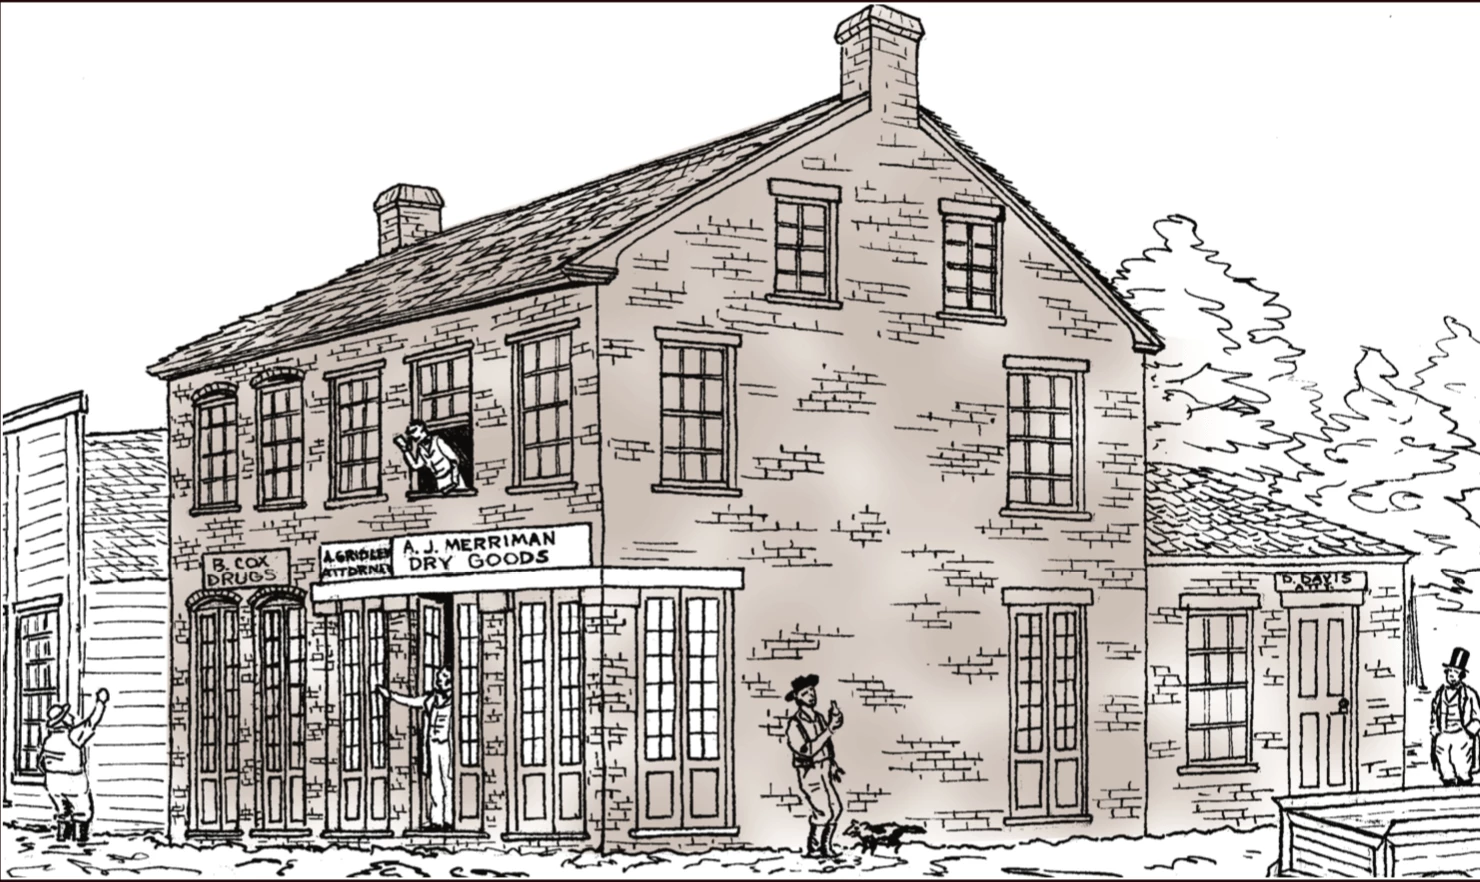 Illustration of AJ Merriman's dry goods store, featuring a two-story brick building, four men on the street, and a man in the second-story window.